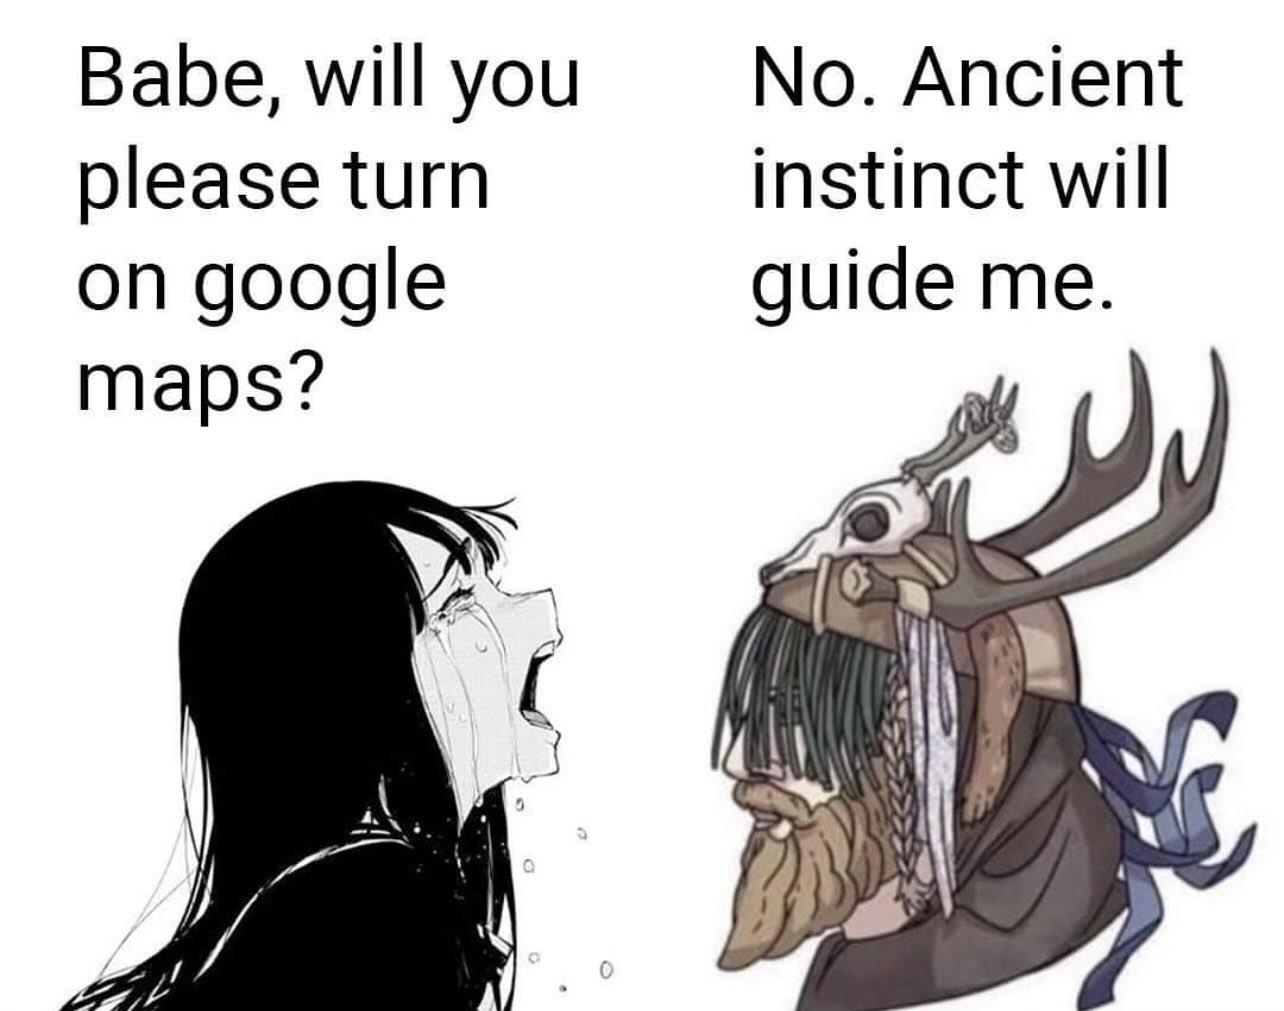 funny memes - dank memes - boys with time machine - Babe, will you please turn on google maps? No. Ancient instinct will guide me.